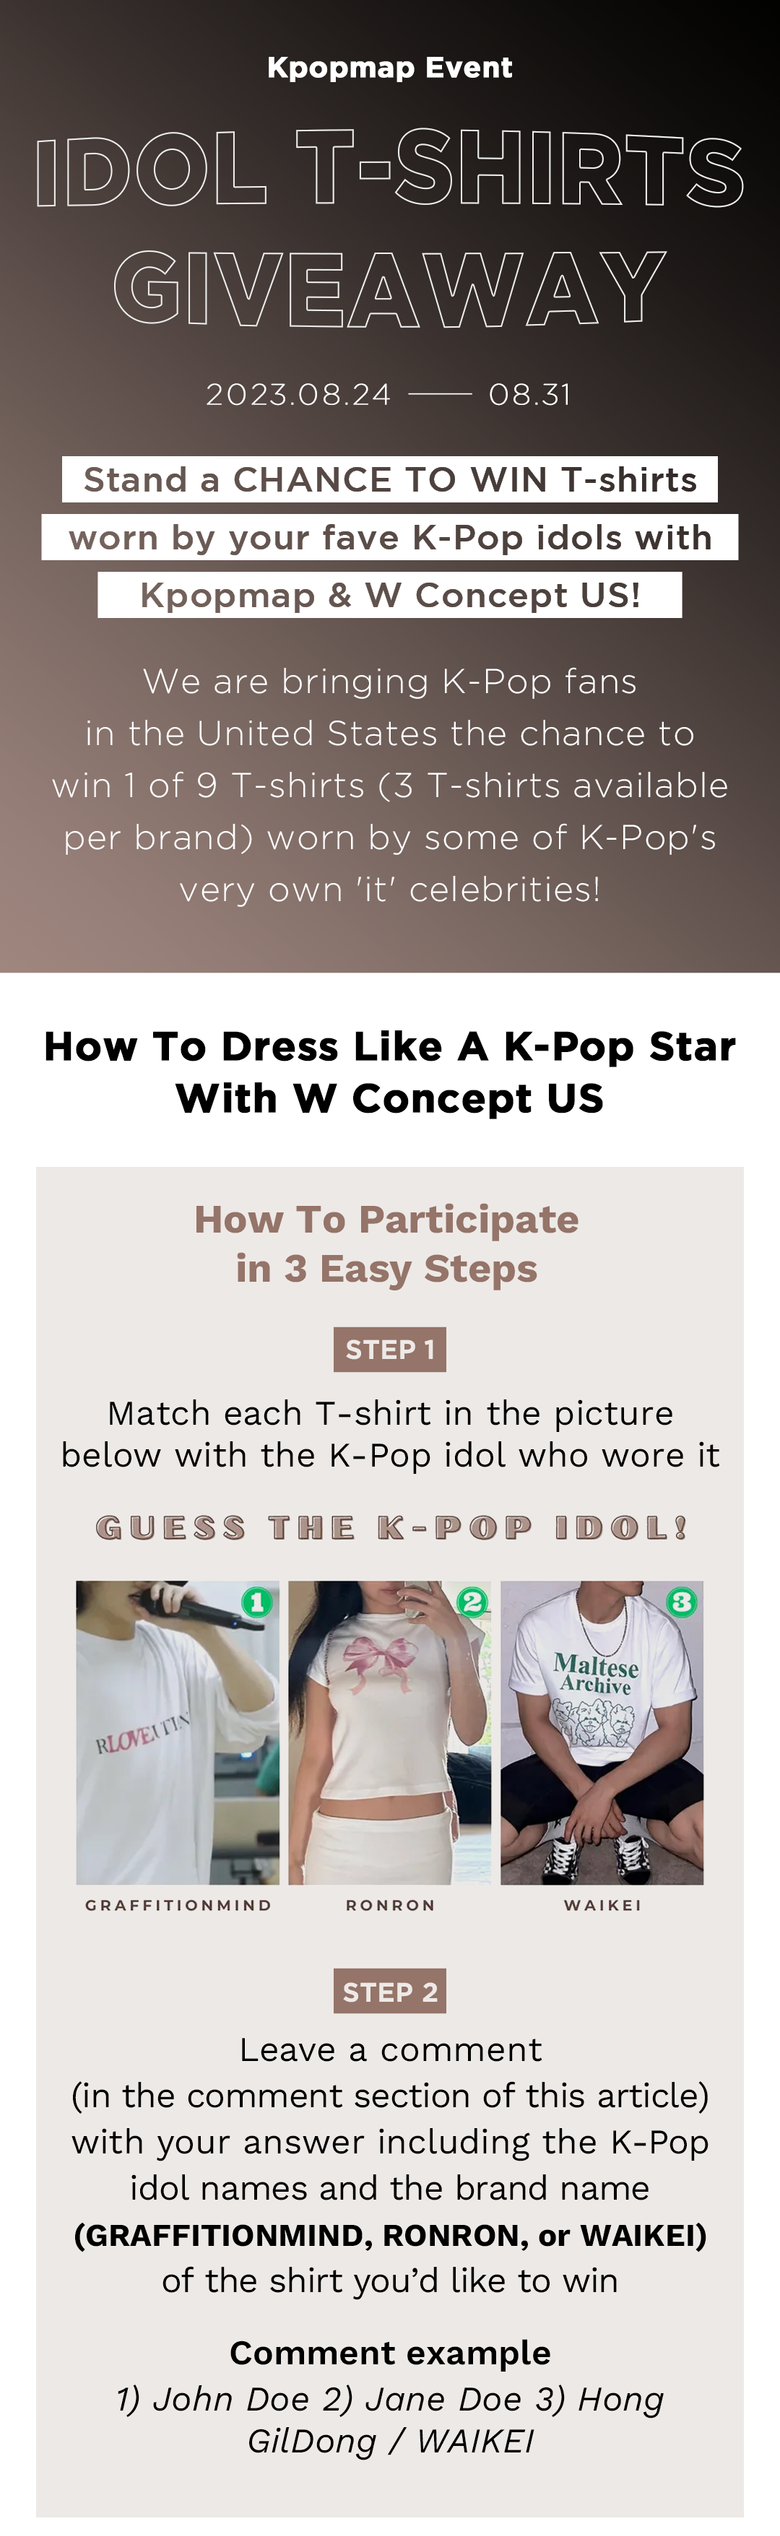 Stand A Chance To Win 100% FREE T-shirts Worn By Your Favorite K-Pop Idols!